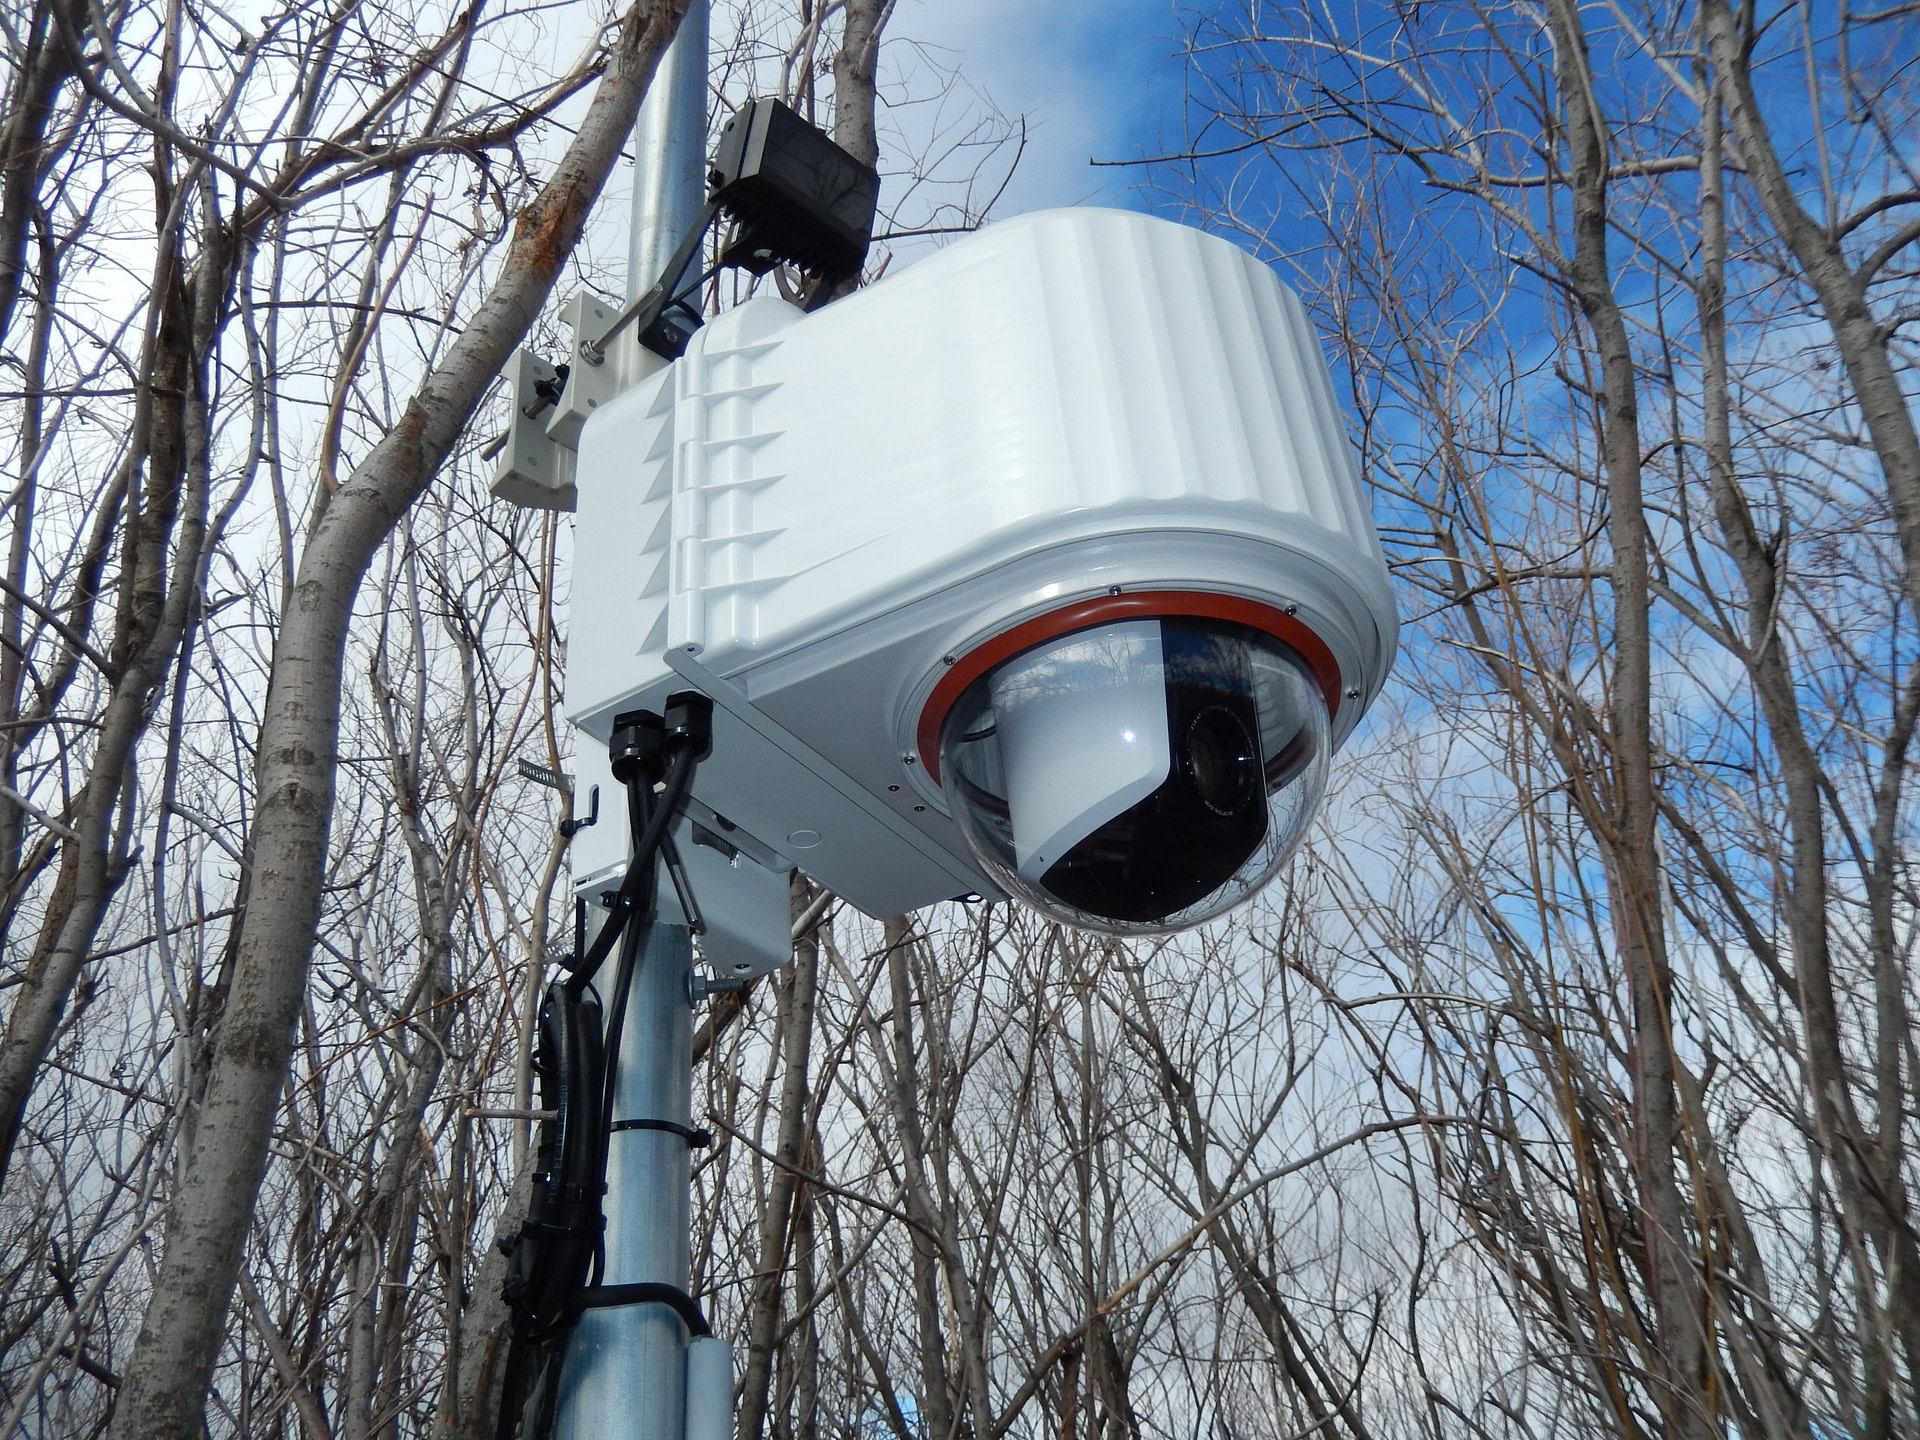 XHeat Climate Controlled PTZ Camera Housing System For Extreme Cold Conditions Installed Overlooking A Long Eared Owl Nest In Missoula Montana 